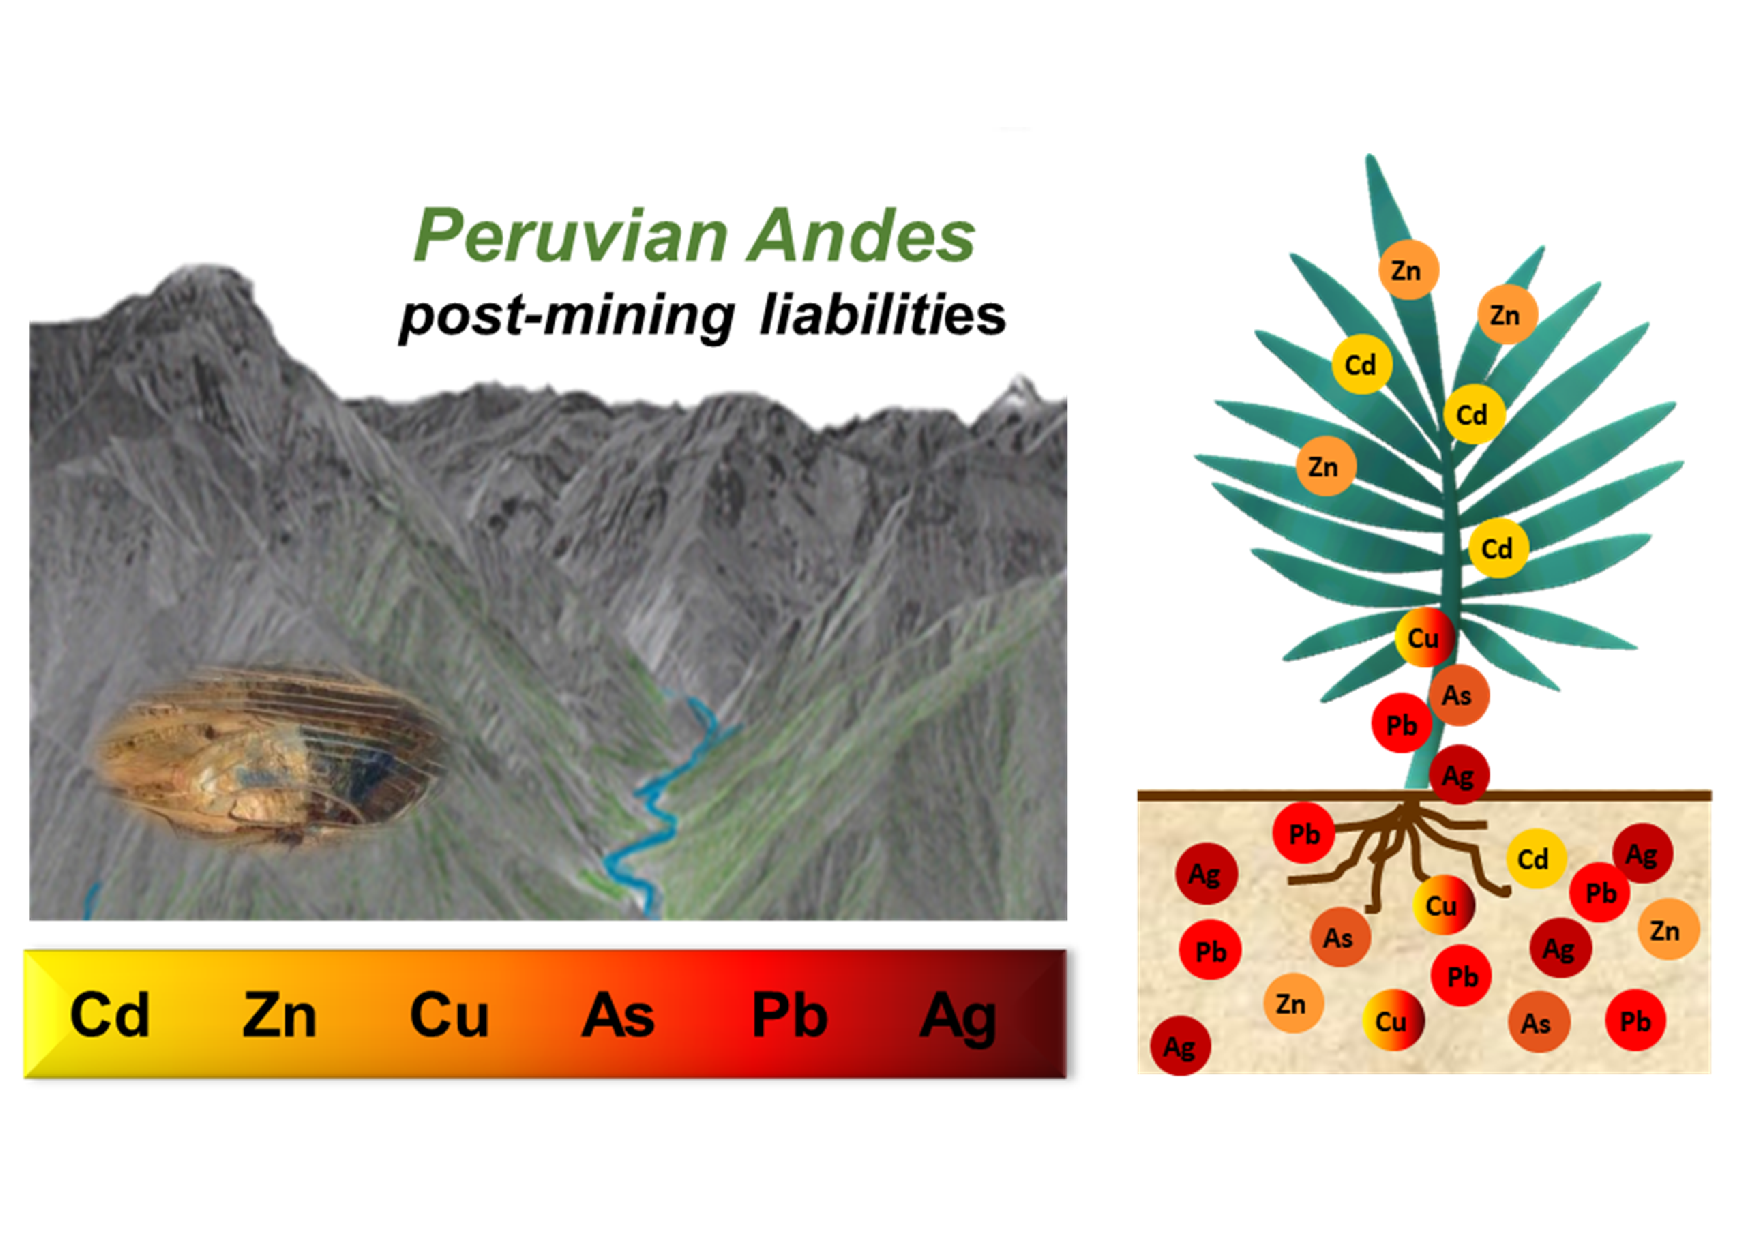 Plants Free Full-Text Accumulation of As, Ag, Cd, Cu, Pb, and Zn by Native Plants Growing in Soils Contaminated by Mining Environmental Liabilities in the Peruvian Andes